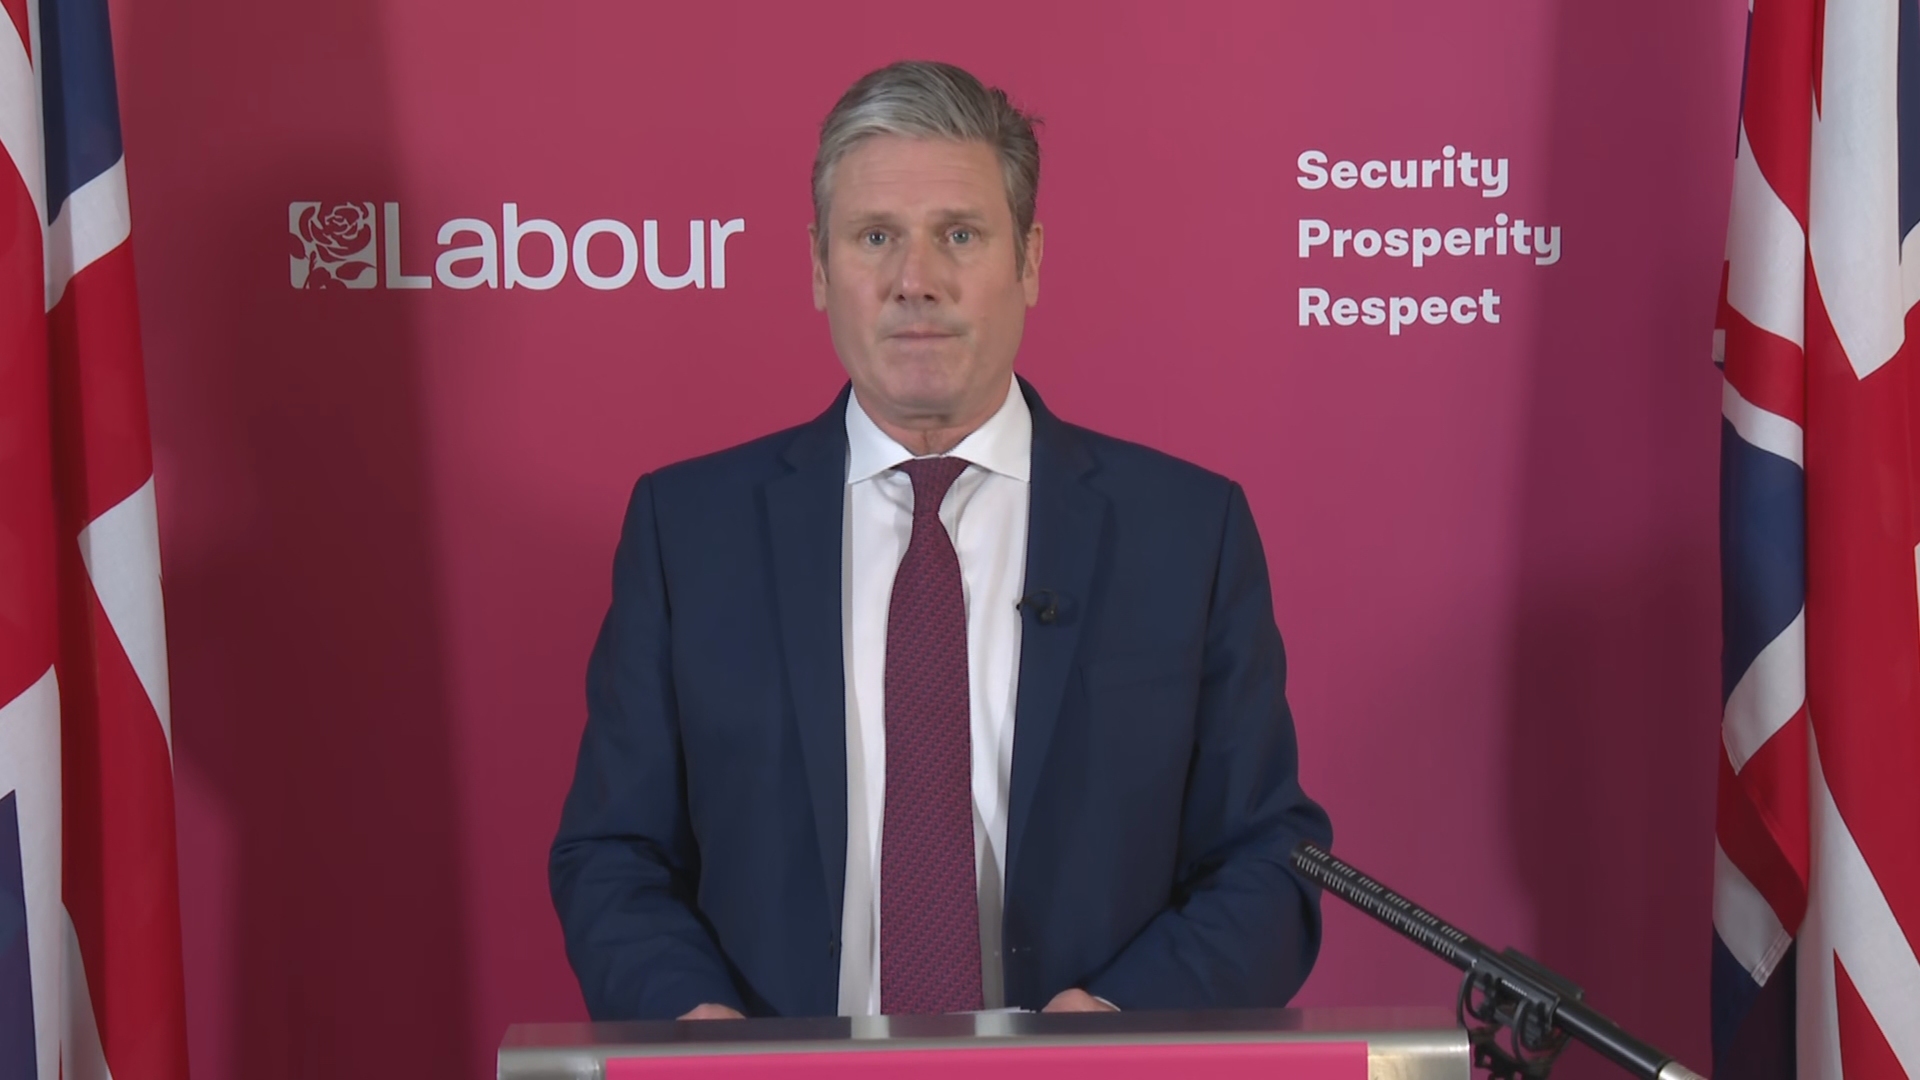 Sir Keir Starmer has defended the controversial ad campaign, which has caused unease among some in his party.